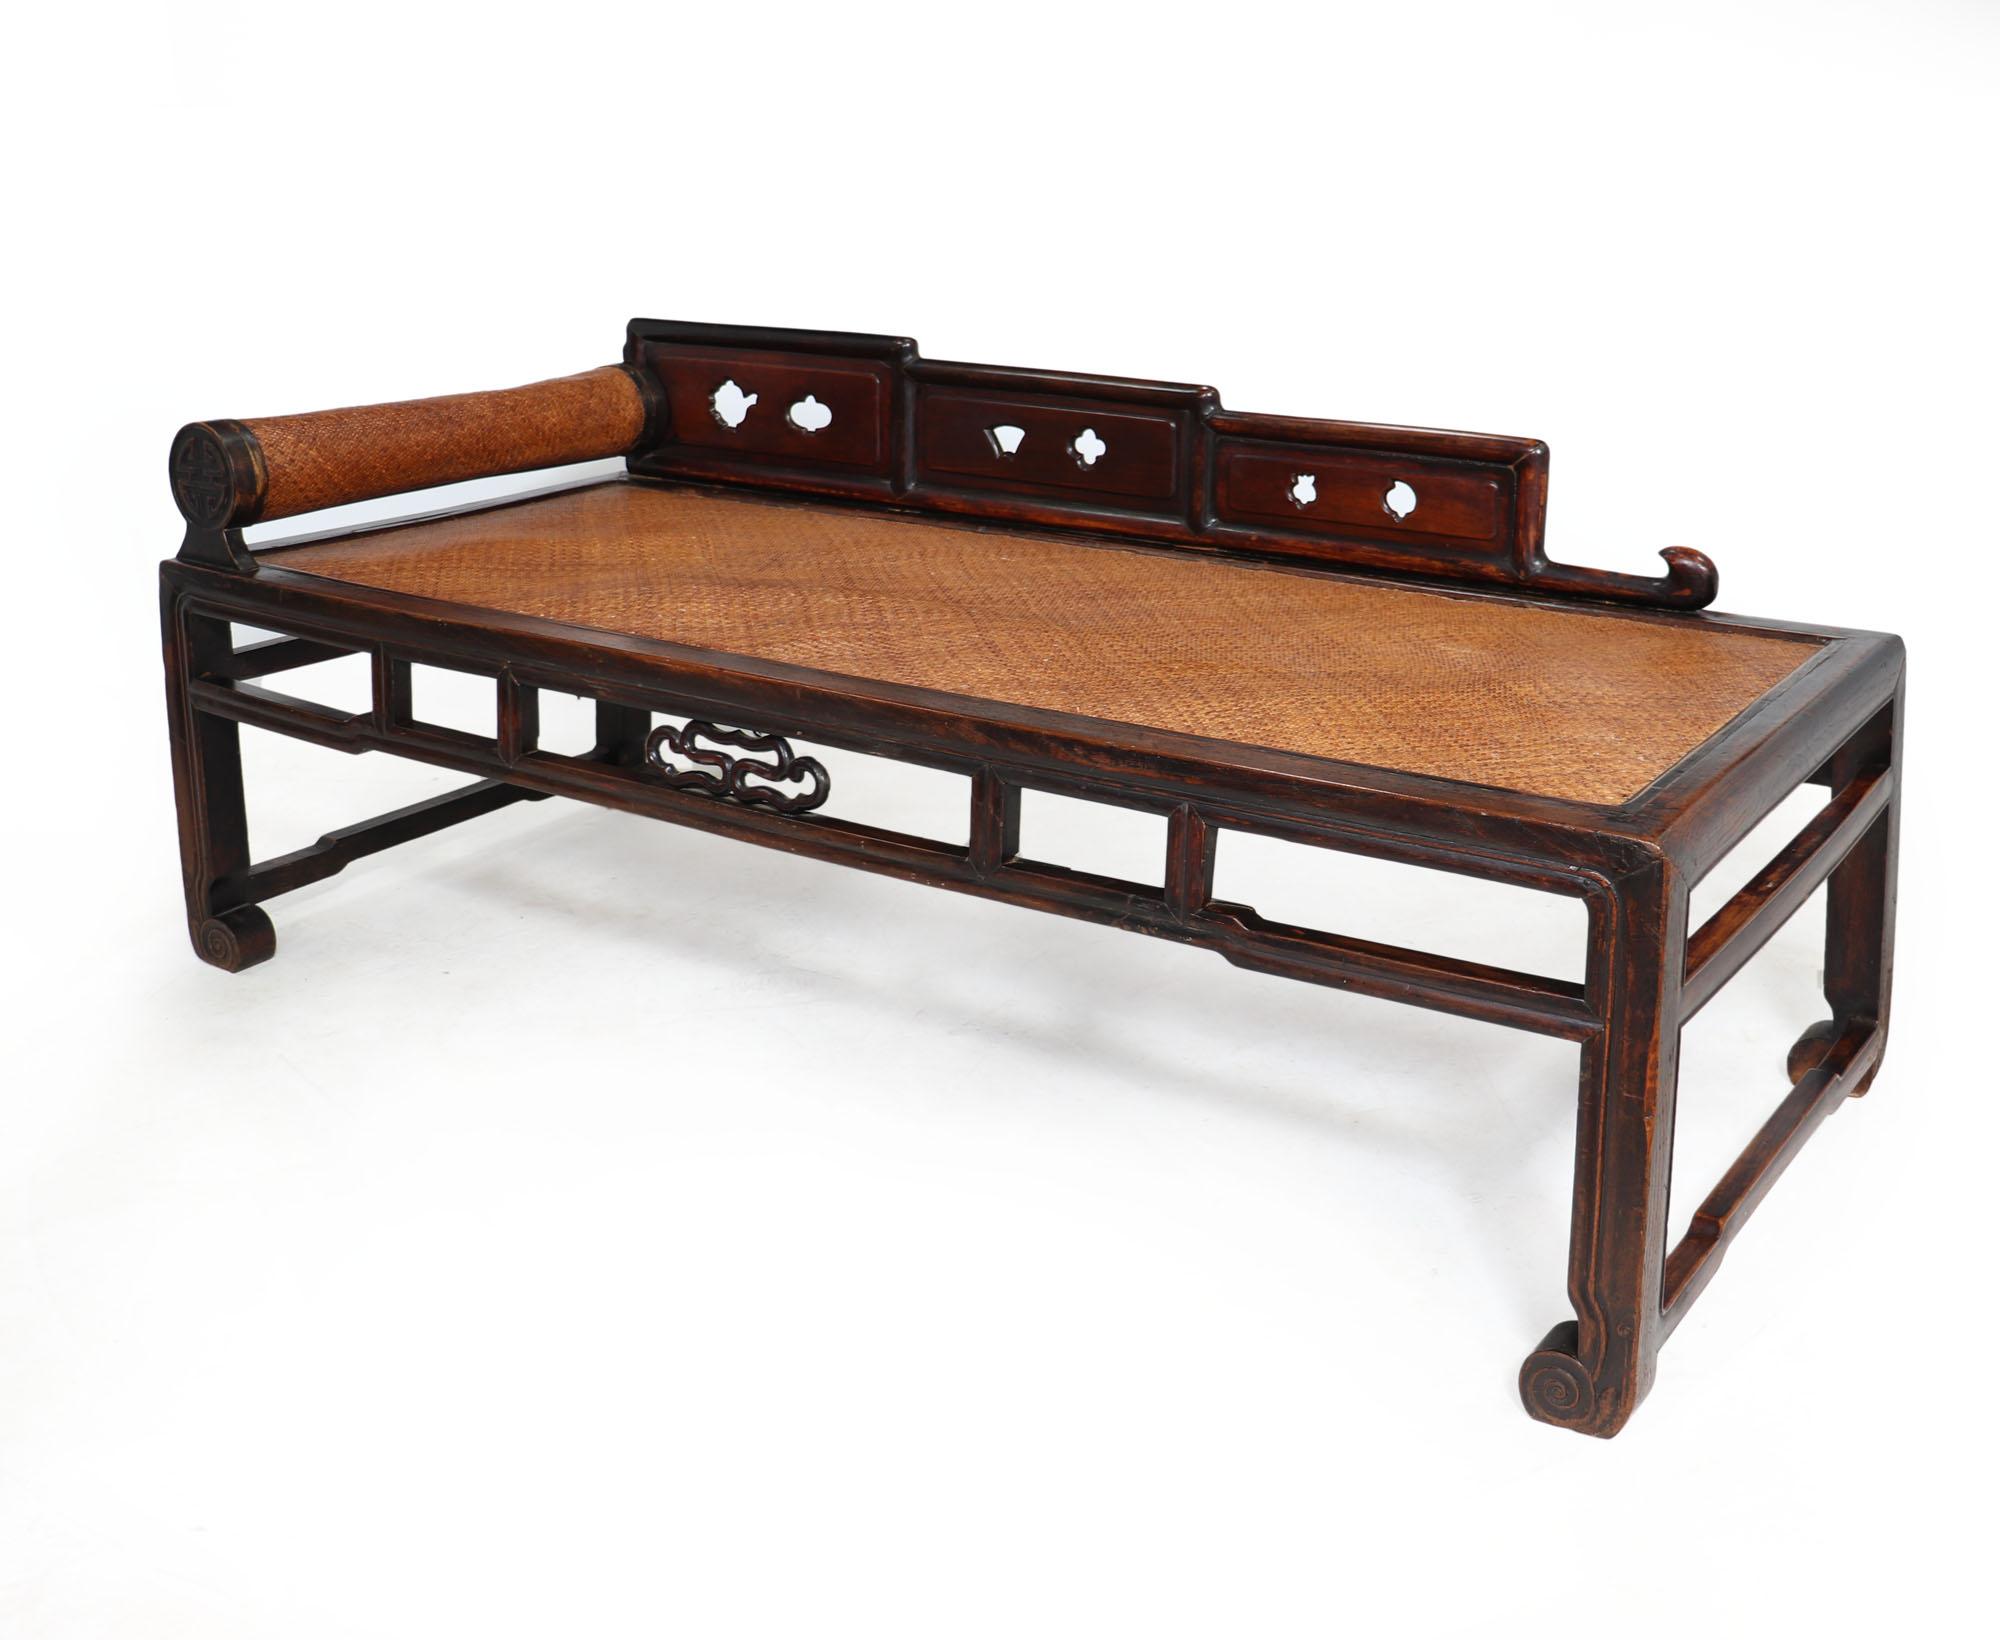 Chinese Export Antique Chinese Hardwood Daybed, C1820